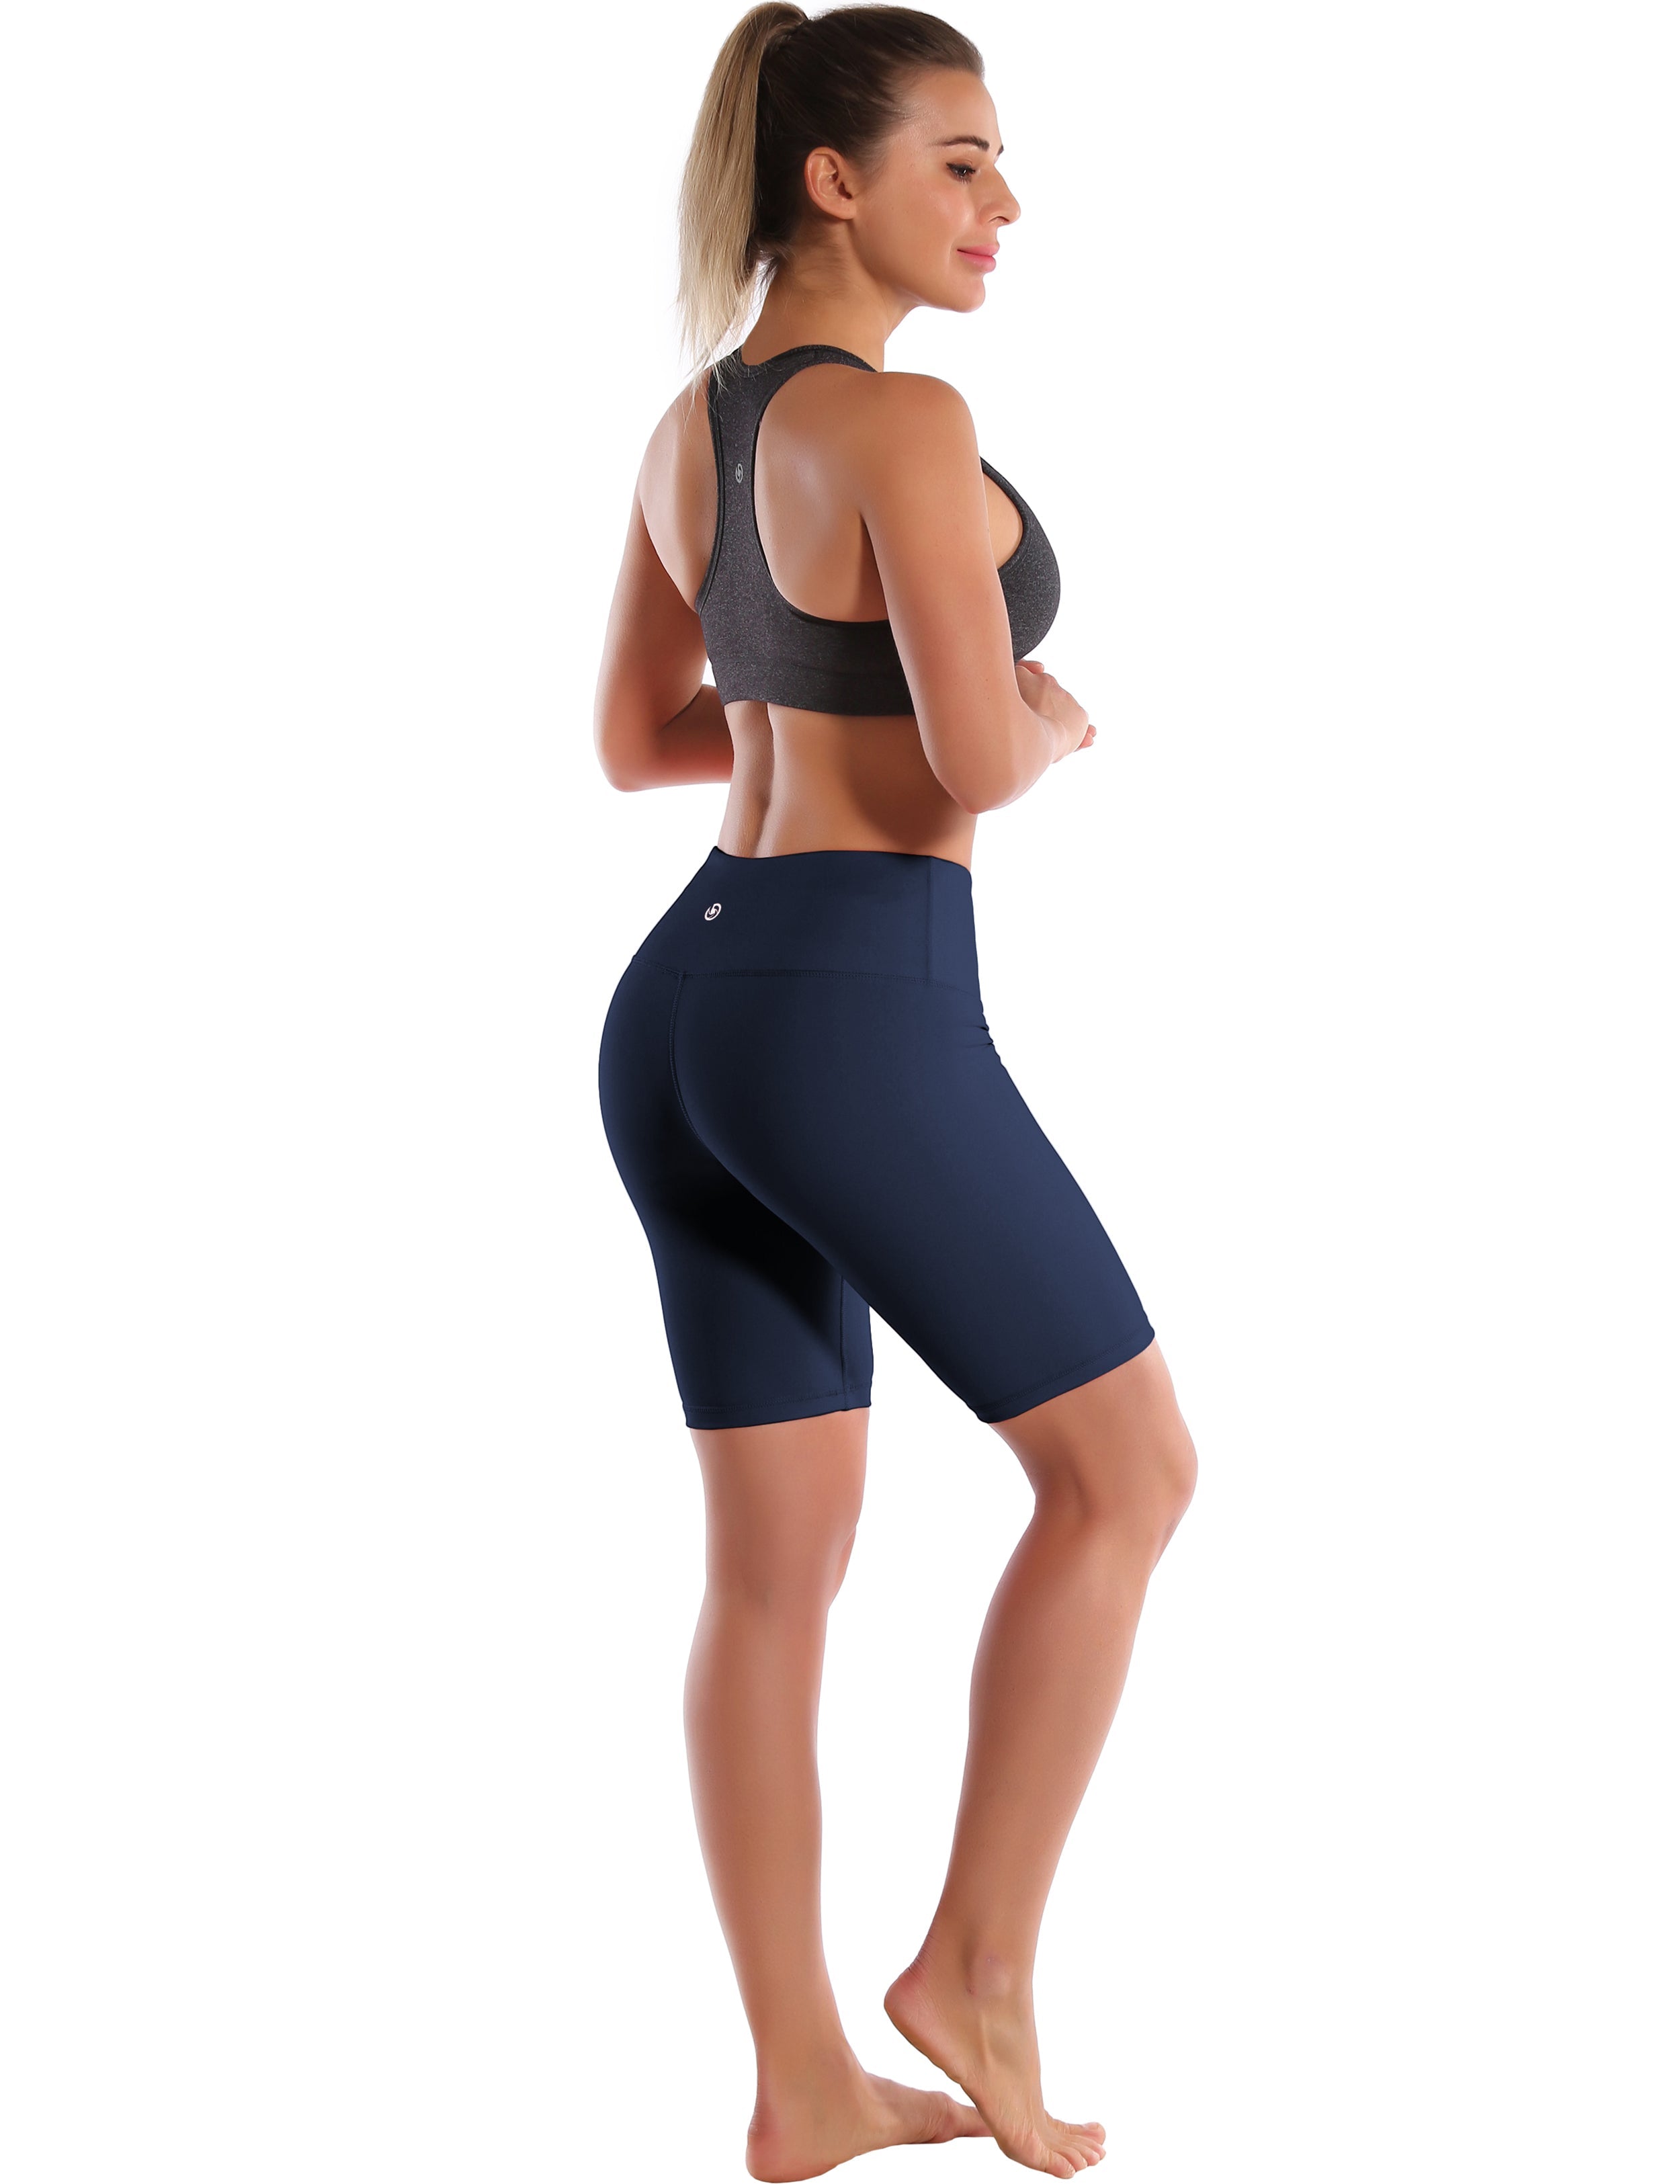 8" High Waist Golf Shorts darknavy Sleek, soft, smooth and totally comfortable: our newest style is here. Softest-ever fabric High elasticity High density 4-way stretch Fabric doesn't attract lint easily No see-through Moisture-wicking Machine wash 75% Nylon, 25% Spandex